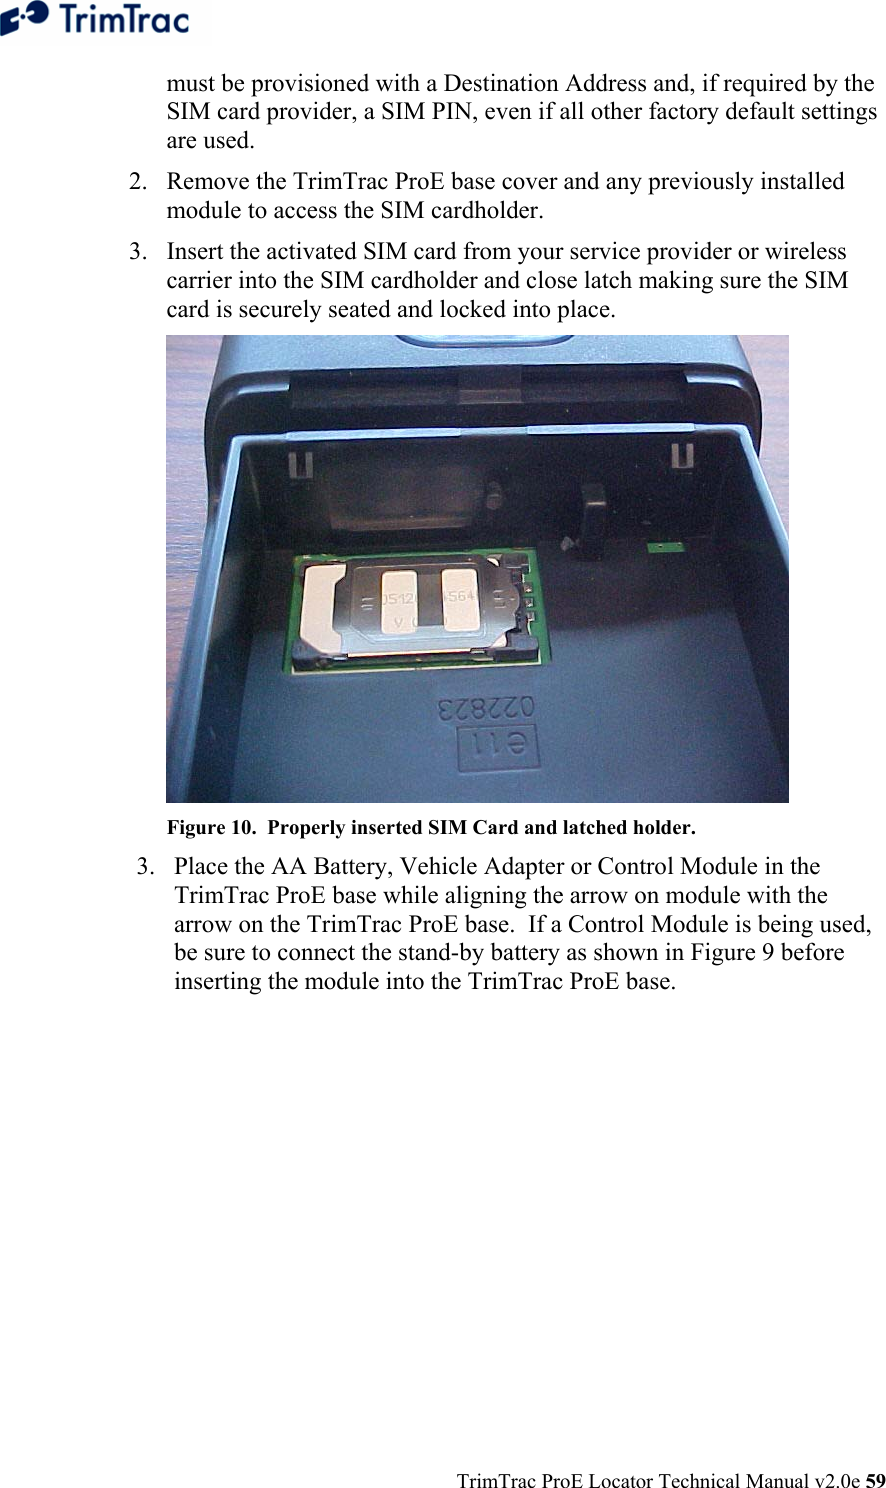  TrimTrac ProE Locator Technical Manual v2.0e 59 must be provisioned with a Destination Address and, if required by the SIM card provider, a SIM PIN, even if all other factory default settings are used. 2. Remove the TrimTrac ProE base cover and any previously installed module to access the SIM cardholder. 3. Insert the activated SIM card from your service provider or wireless carrier into the SIM cardholder and close latch making sure the SIM card is securely seated and locked into place.  Figure 10.  Properly inserted SIM Card and latched holder. 3. Place the AA Battery, Vehicle Adapter or Control Module in the TrimTrac ProE base while aligning the arrow on module with the arrow on the TrimTrac ProE base.  If a Control Module is being used, be sure to connect the stand-by battery as shown in Figure 9 before inserting the module into the TrimTrac ProE base. 